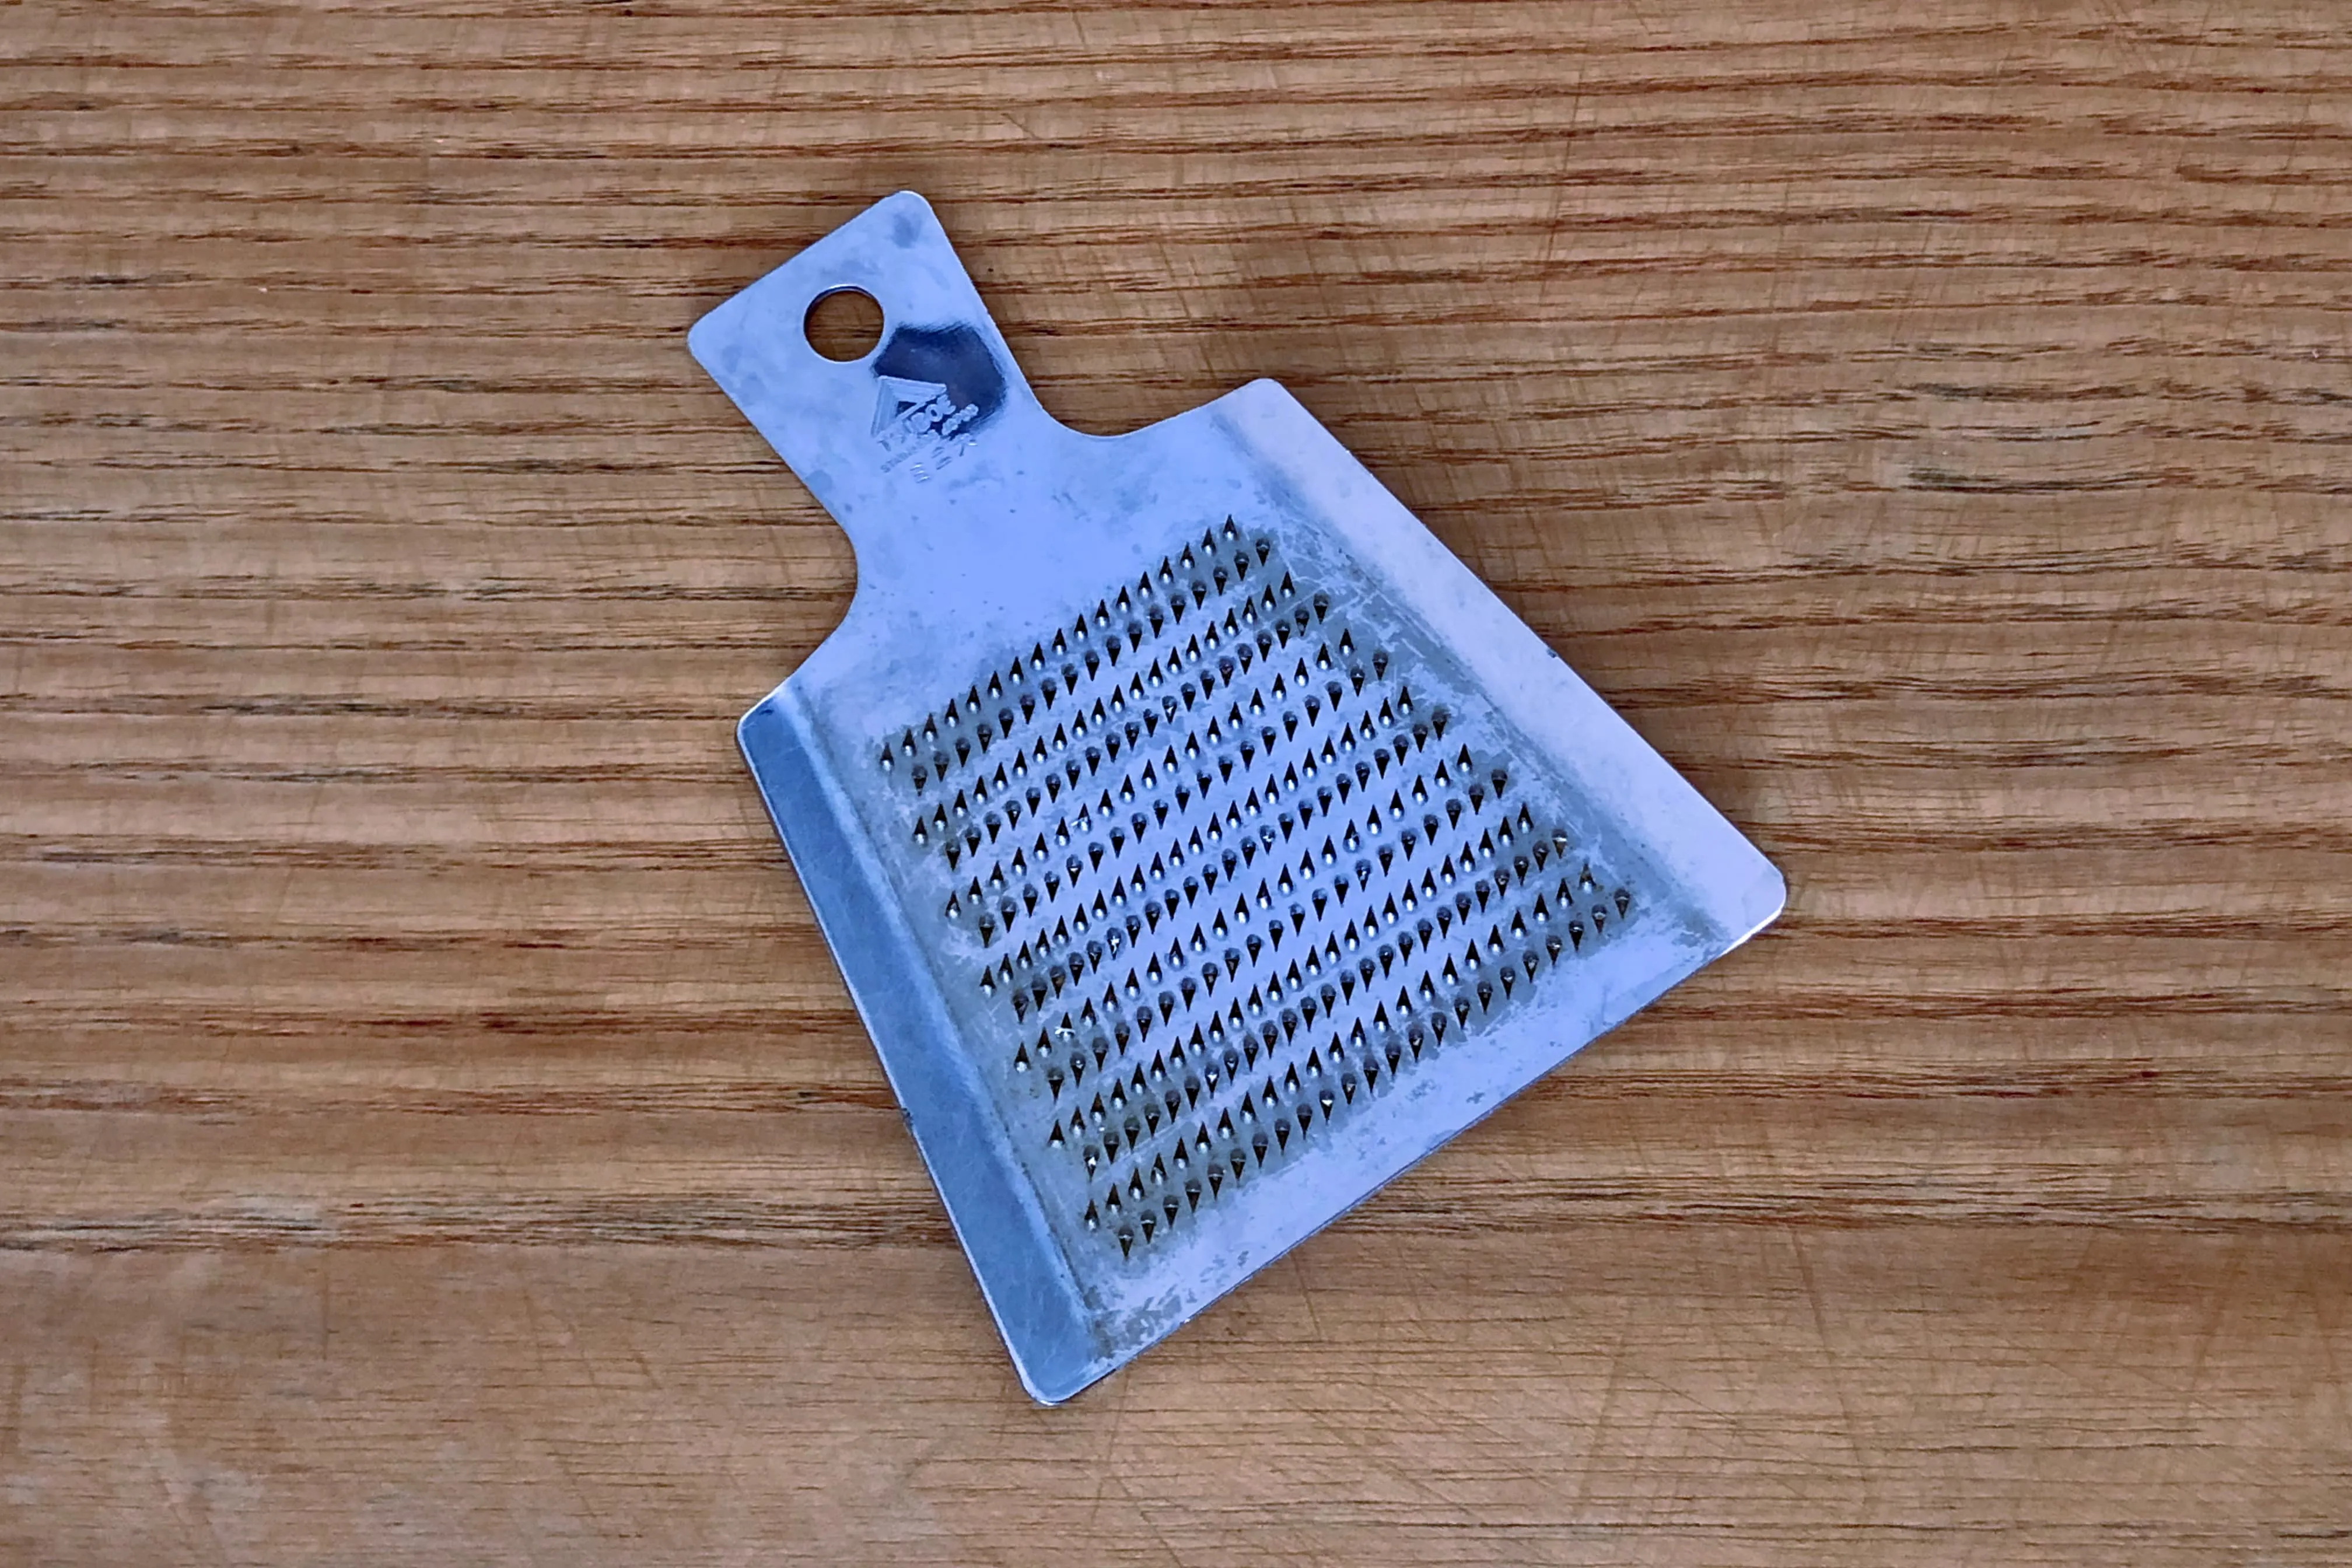 A metalic root vegetable grater